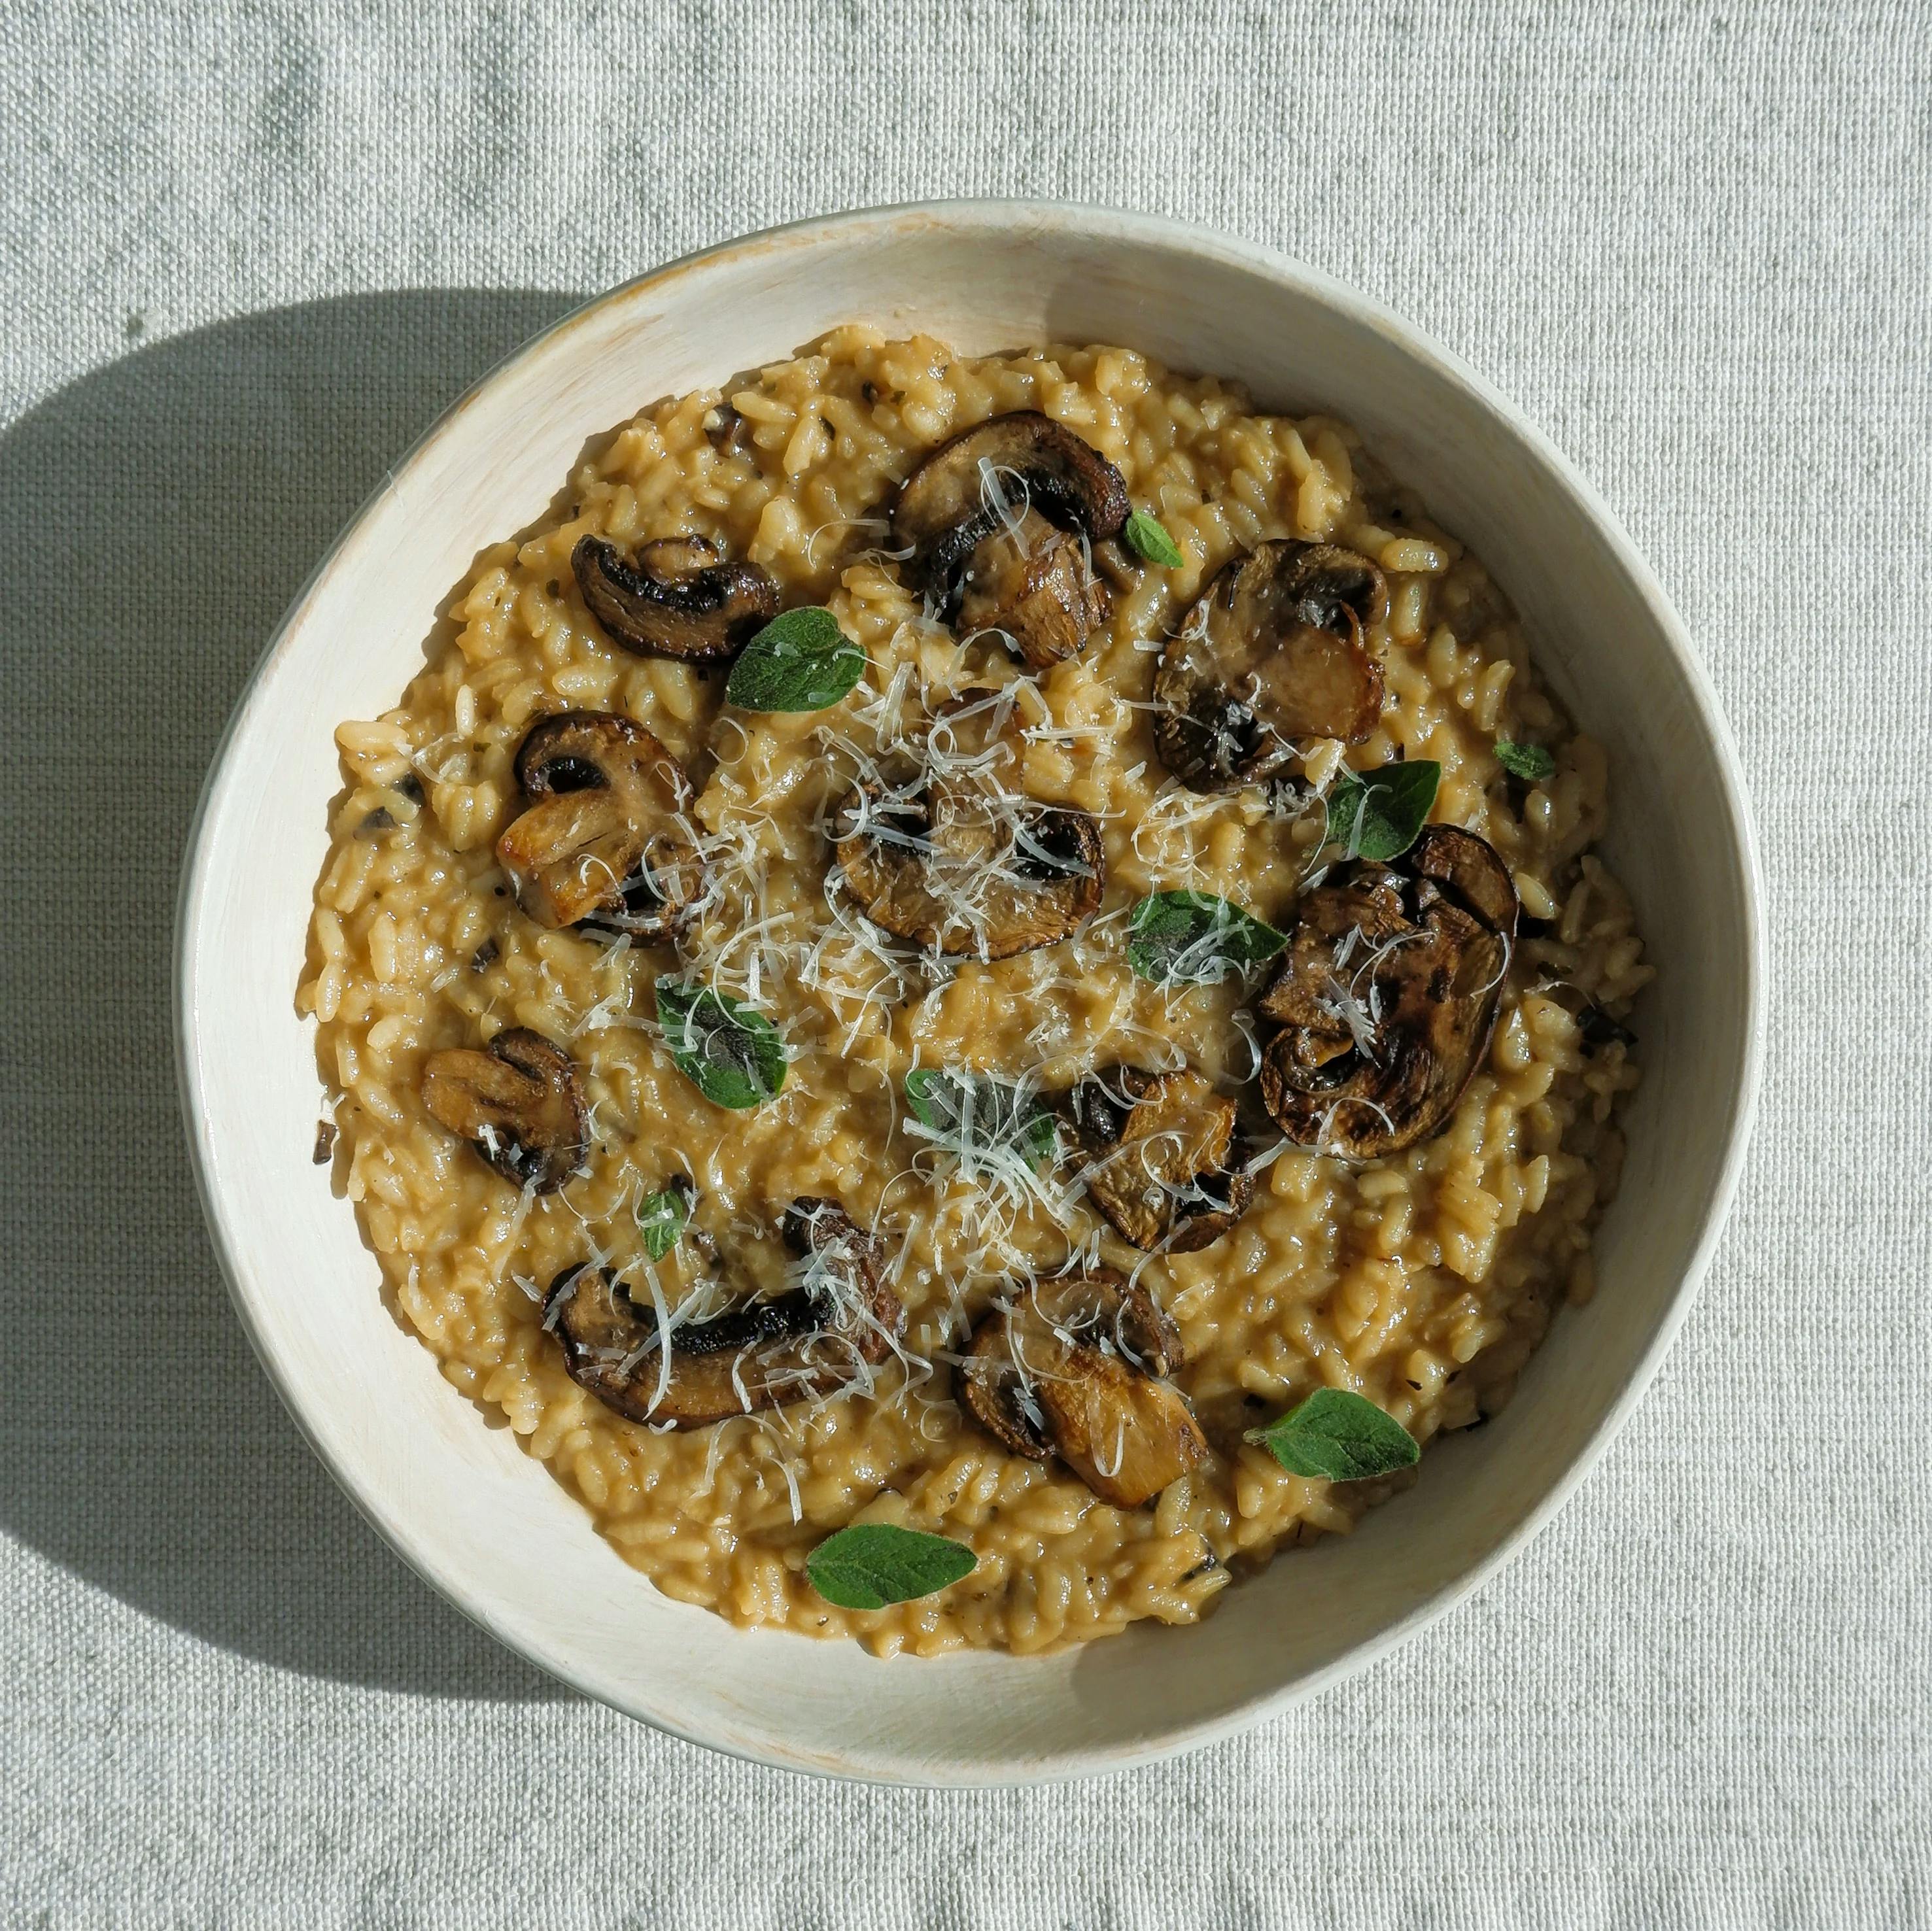 Picture for Mushroom Risotto